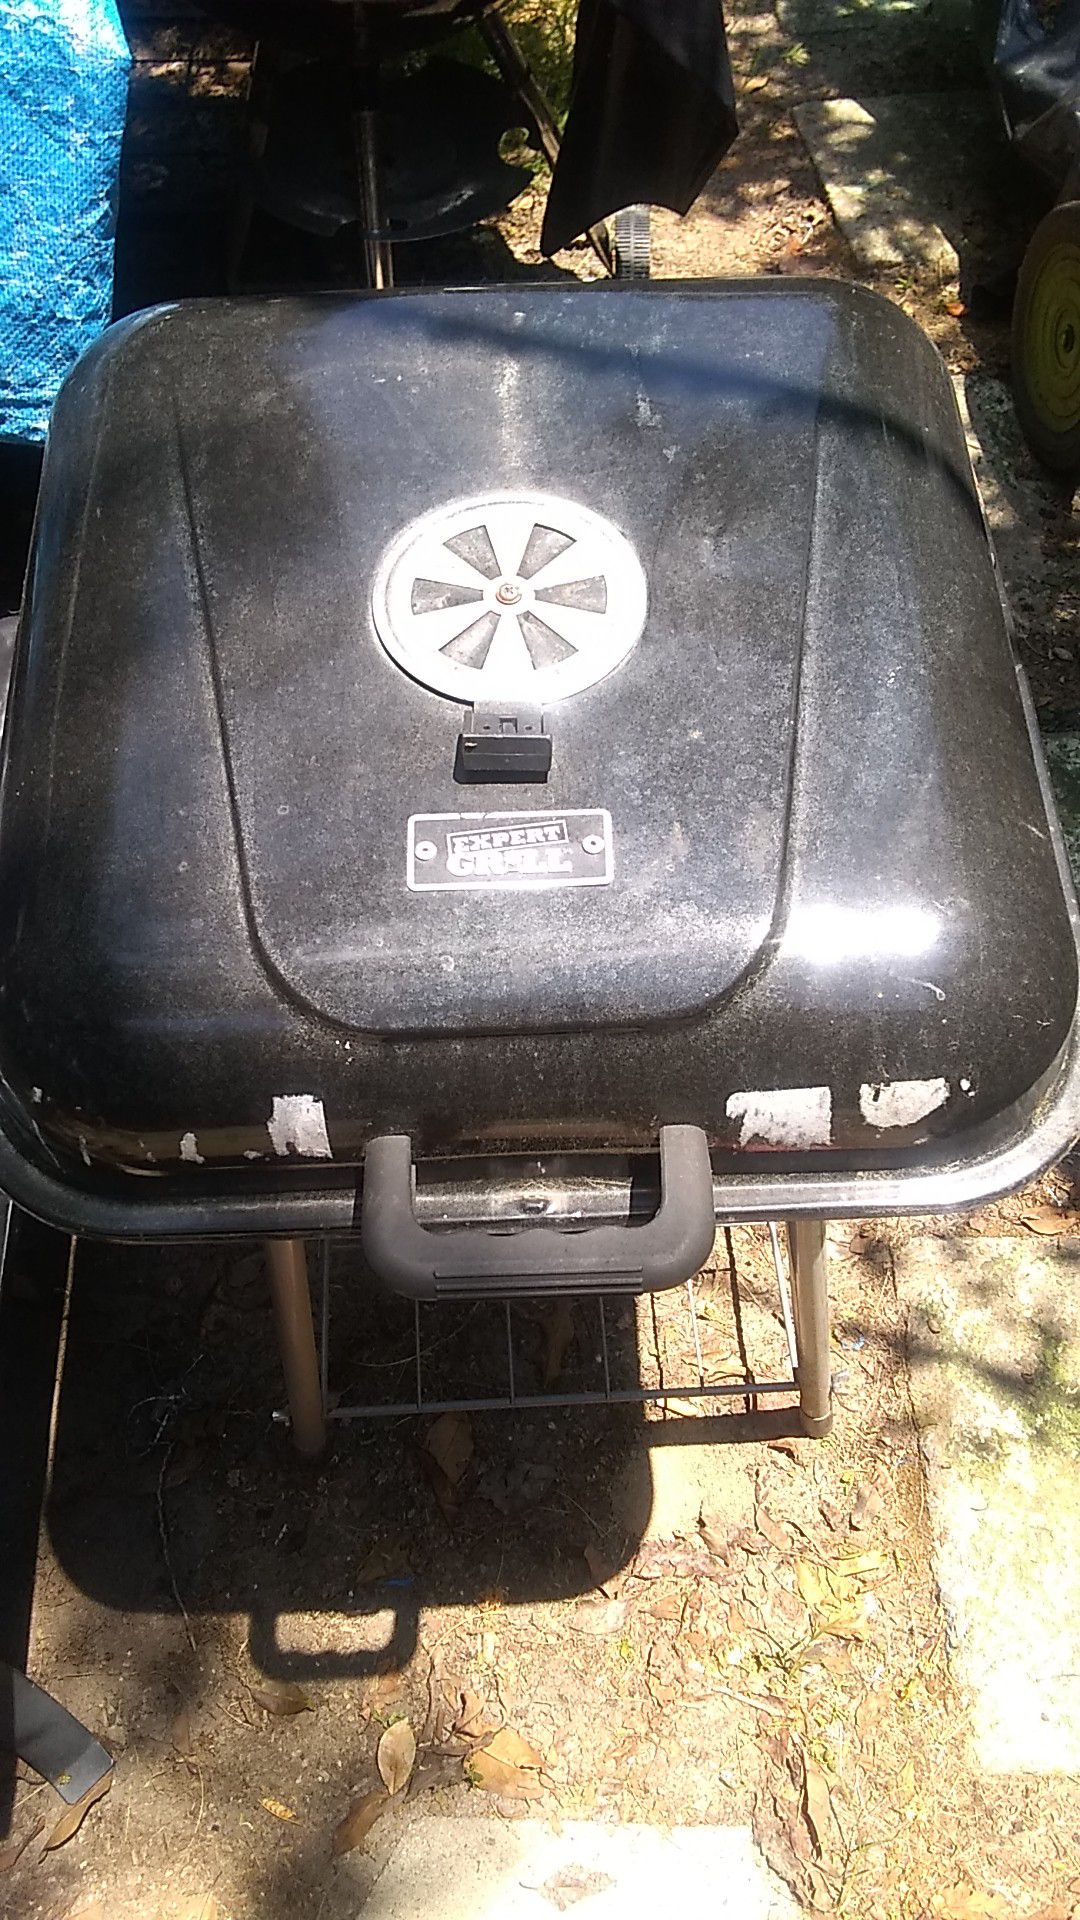 $25 expert Square charcoal grill 30 or best offer clean